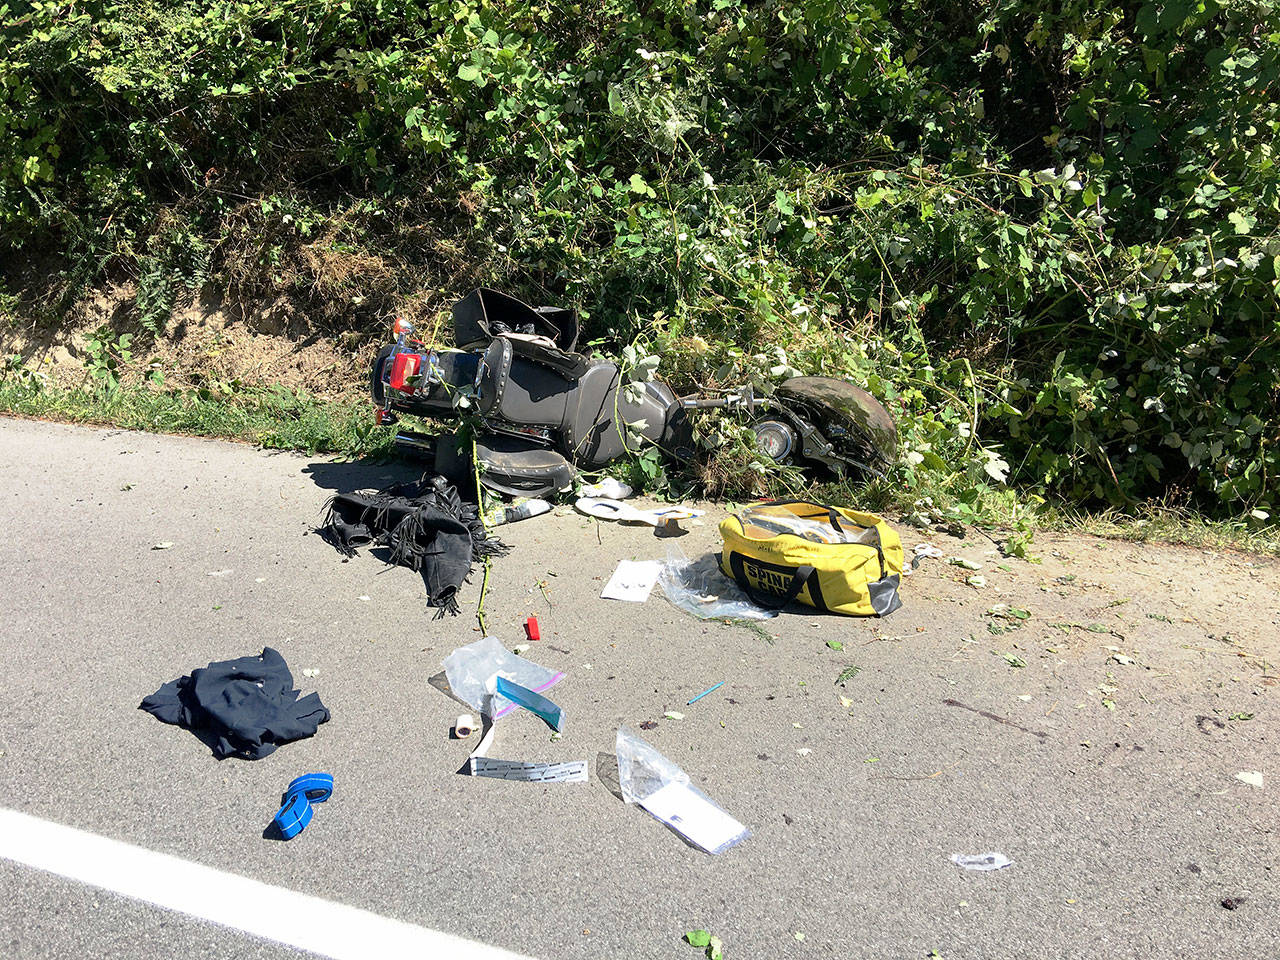 A man was killed and a woman was airlifted to Harborview Medical Center in a motorcycle accident in Port Townsend on Monday. (Bill Beezley/East Jefferson Fire-Rescue)